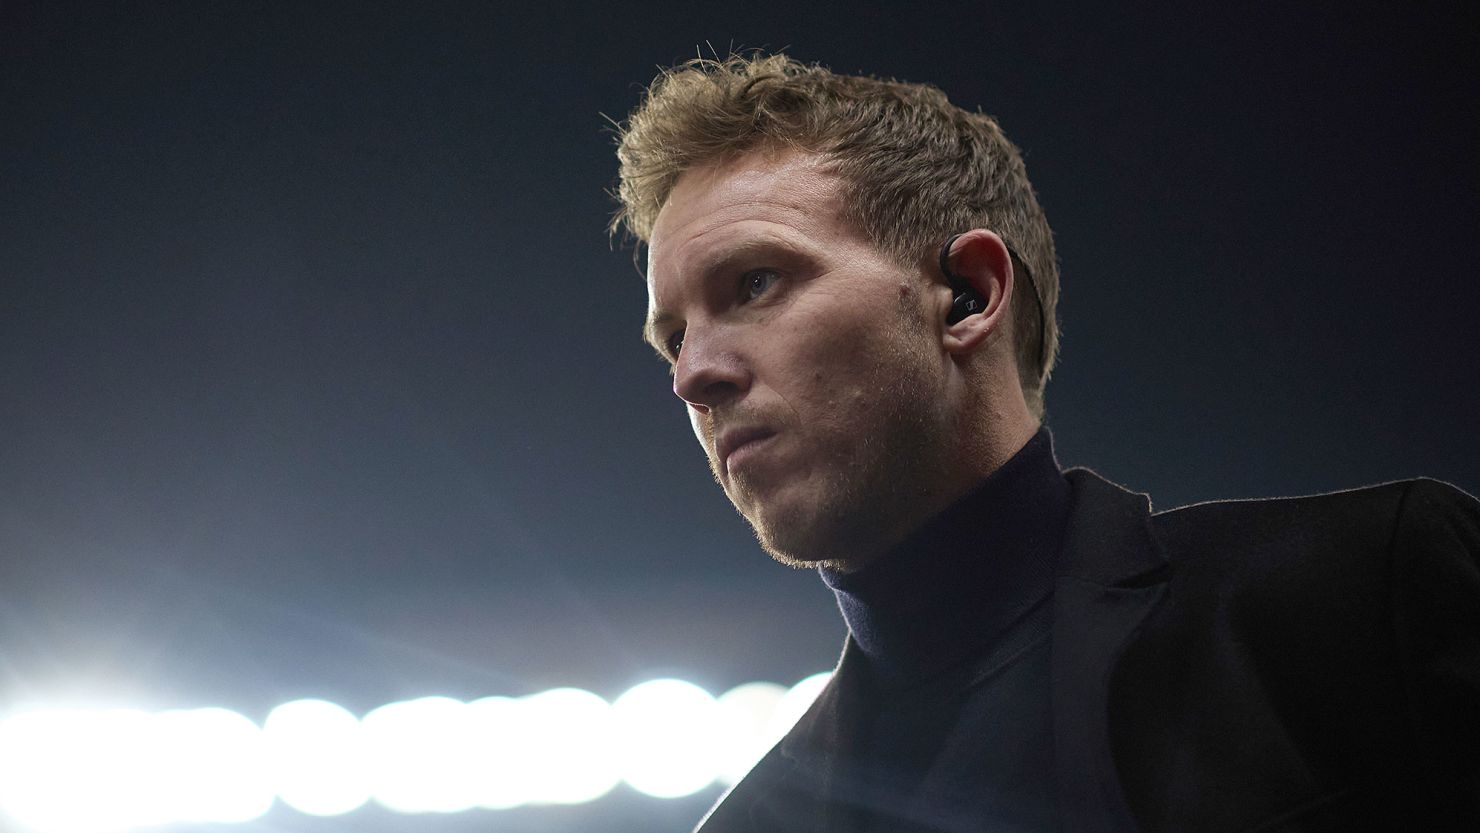 Julian Nagelsmann attends Bayern Munich's Champions League game against PSG on February 14.